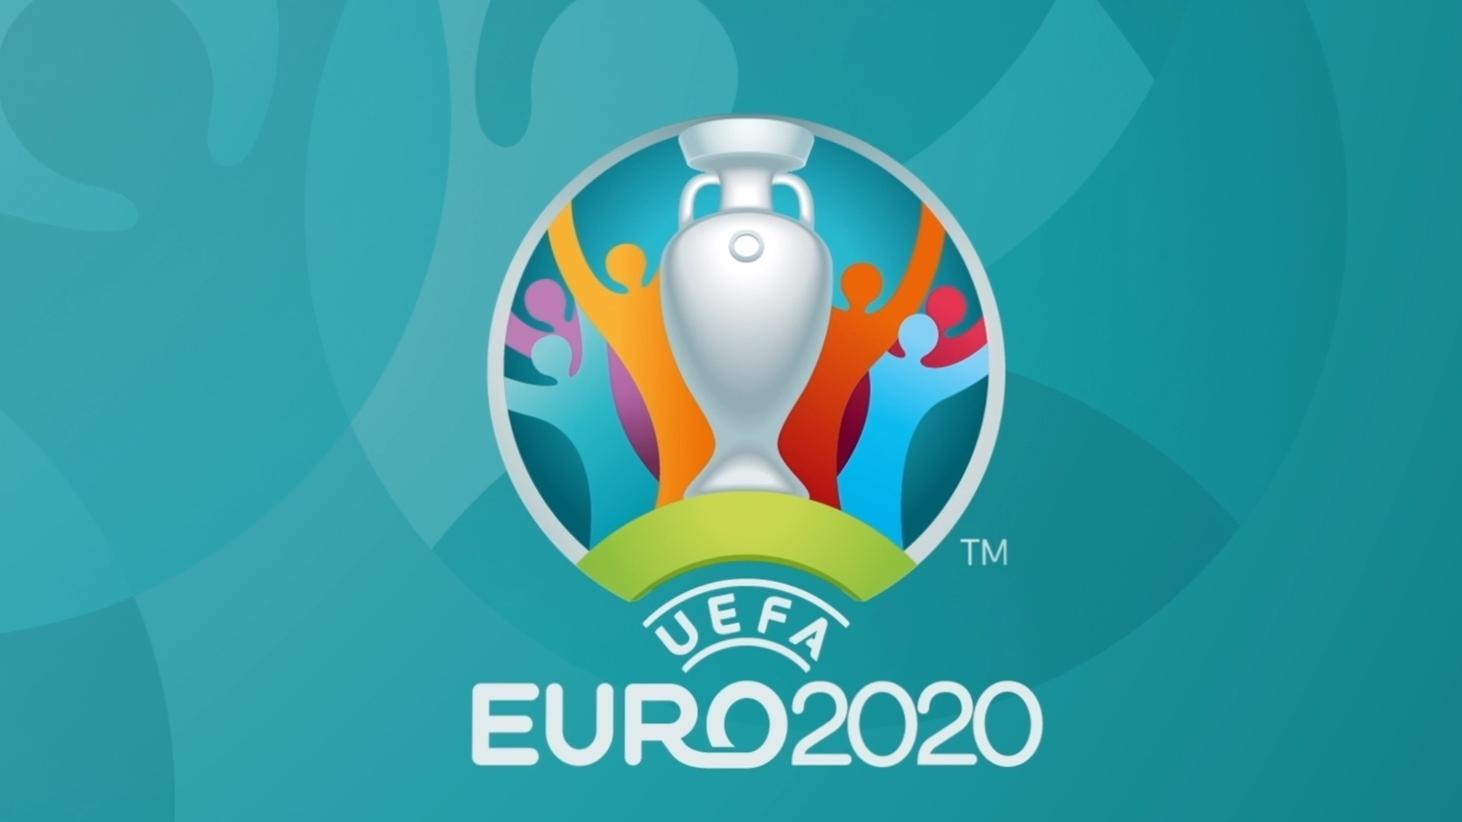 UEFA EURO 2020: all you need to know